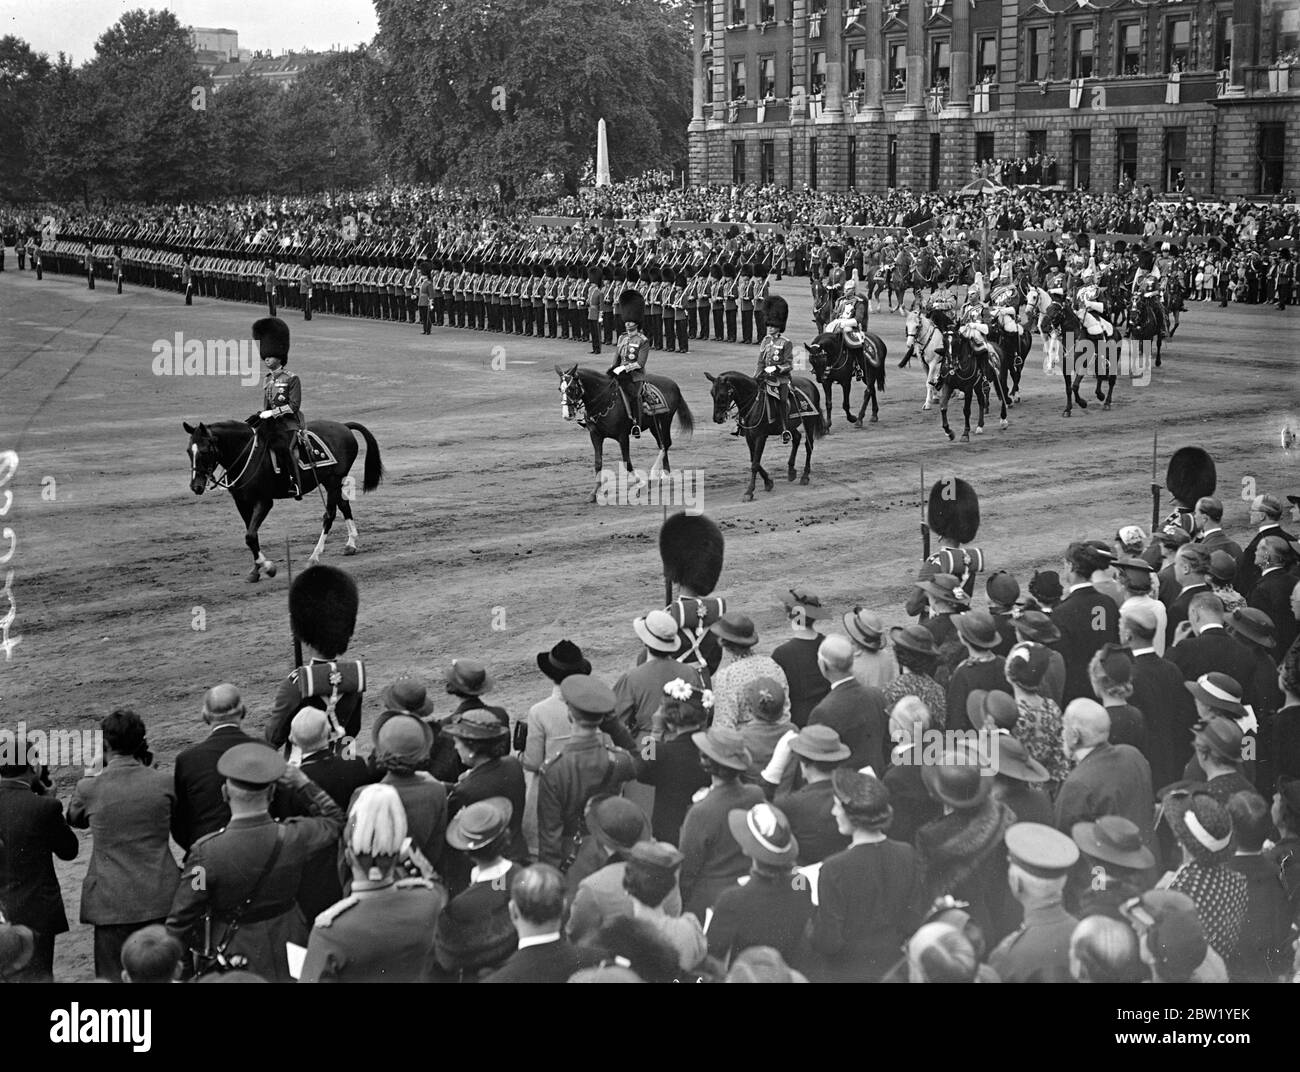 King rides in procession to Horse Guards for Trooping the Colour. For the first time since his succession the King rode in procession from Buckingham Palace to attend the ceremony of Trooping the Colour on the Horse Guards Parade. The King was accompanied by the Duke of Gloucester and Kent and Prince Arthur of Connaught. The Queen and other members of the Royal Family watched the ceremony. Photo shows: the King arriving on the parade ground. 9 June 1937 Stock Photo